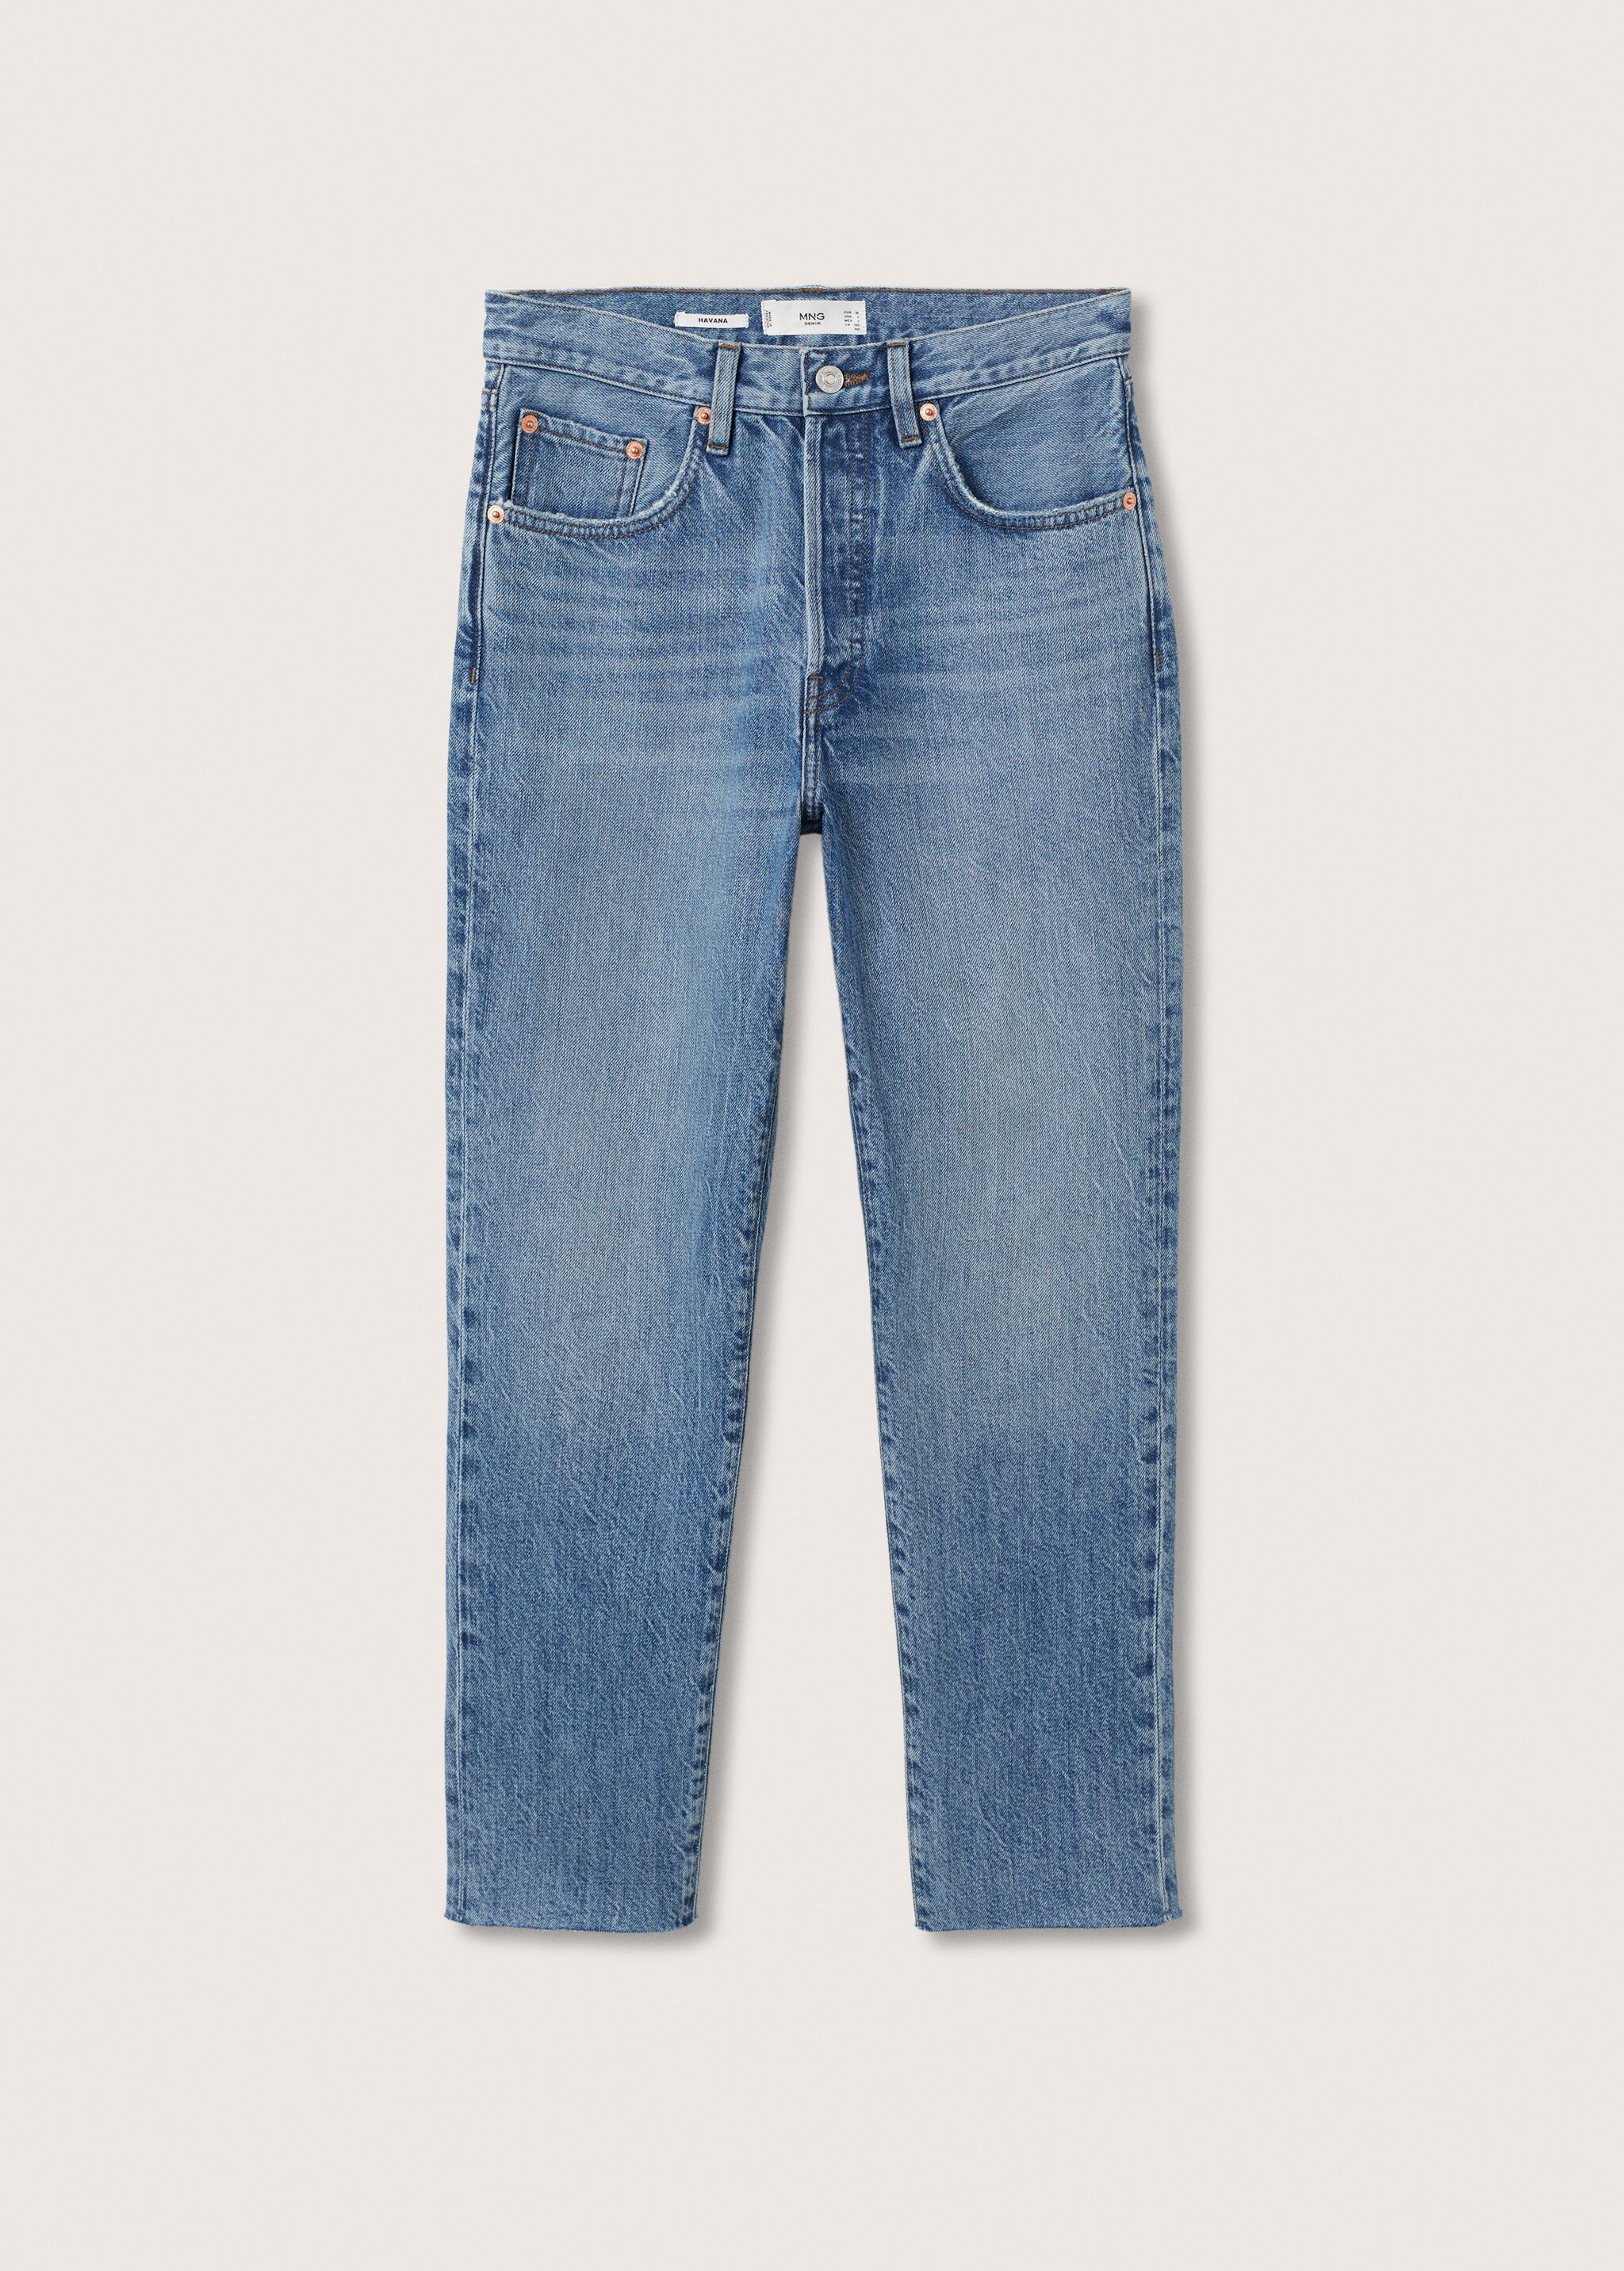 Highwaist straight cropped jeans - Article without model